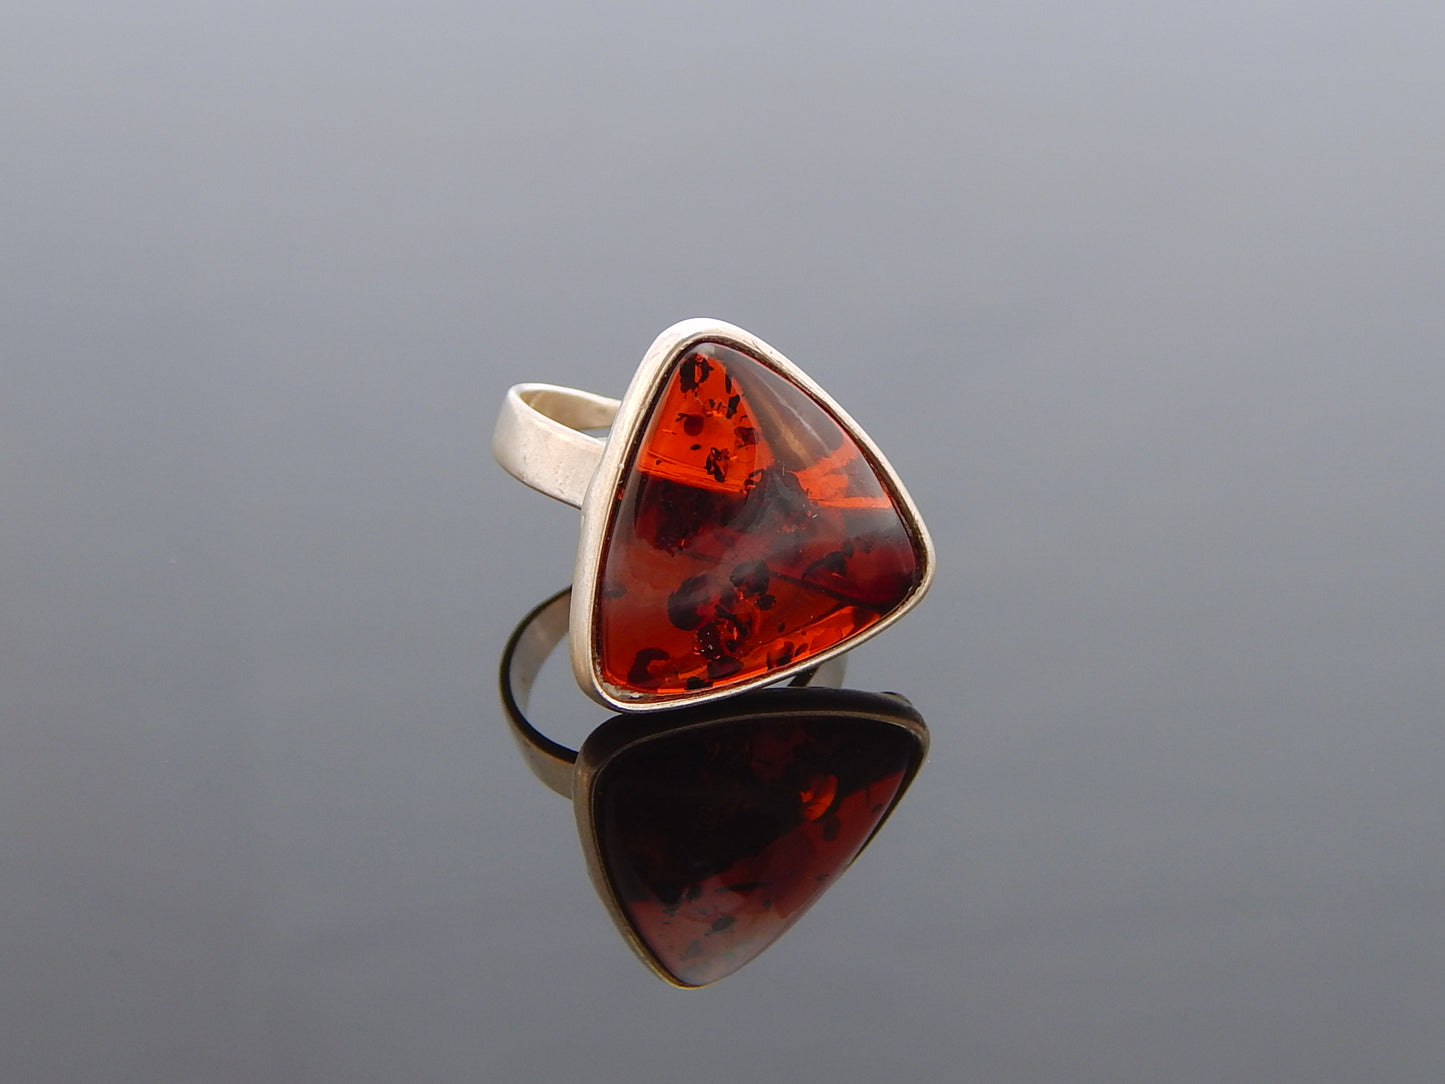 Natural Baltic Cherry Amber Trillion Cut Adjustable Ring in 925 Sterling Silver